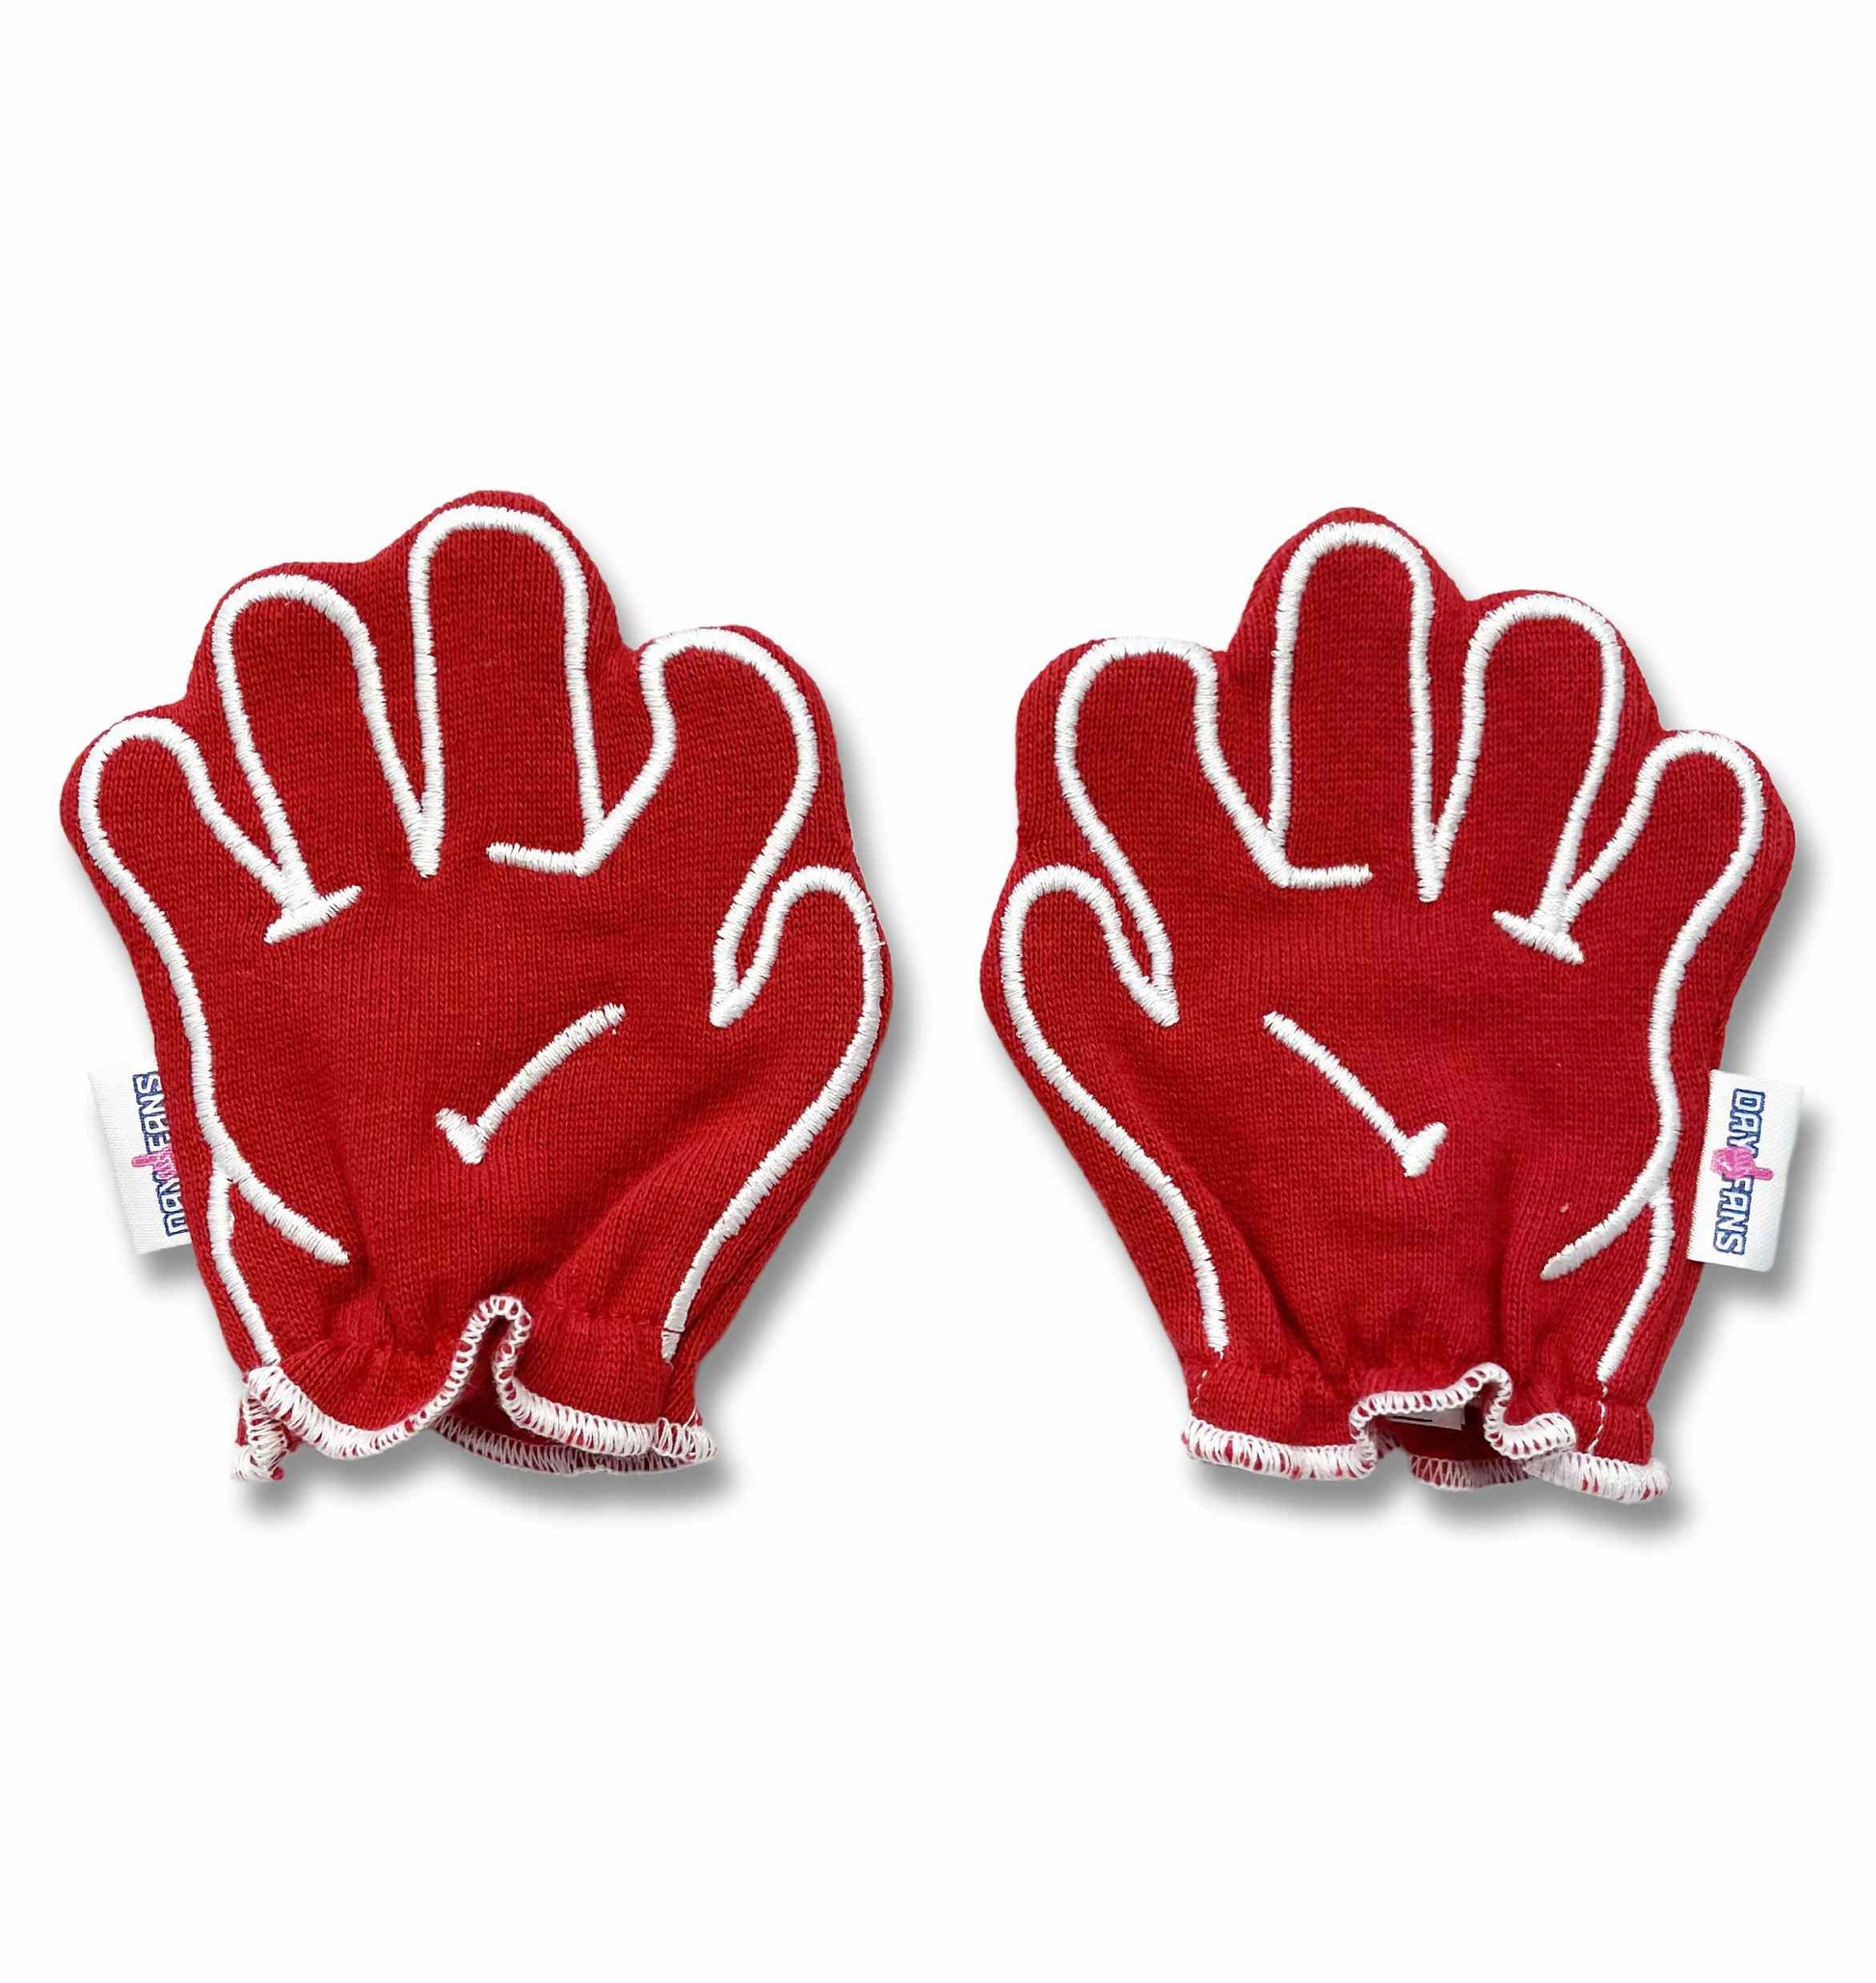 Arkansas Wooo Pig FanMitts Baby Mittens Cardinal Red Front Pair